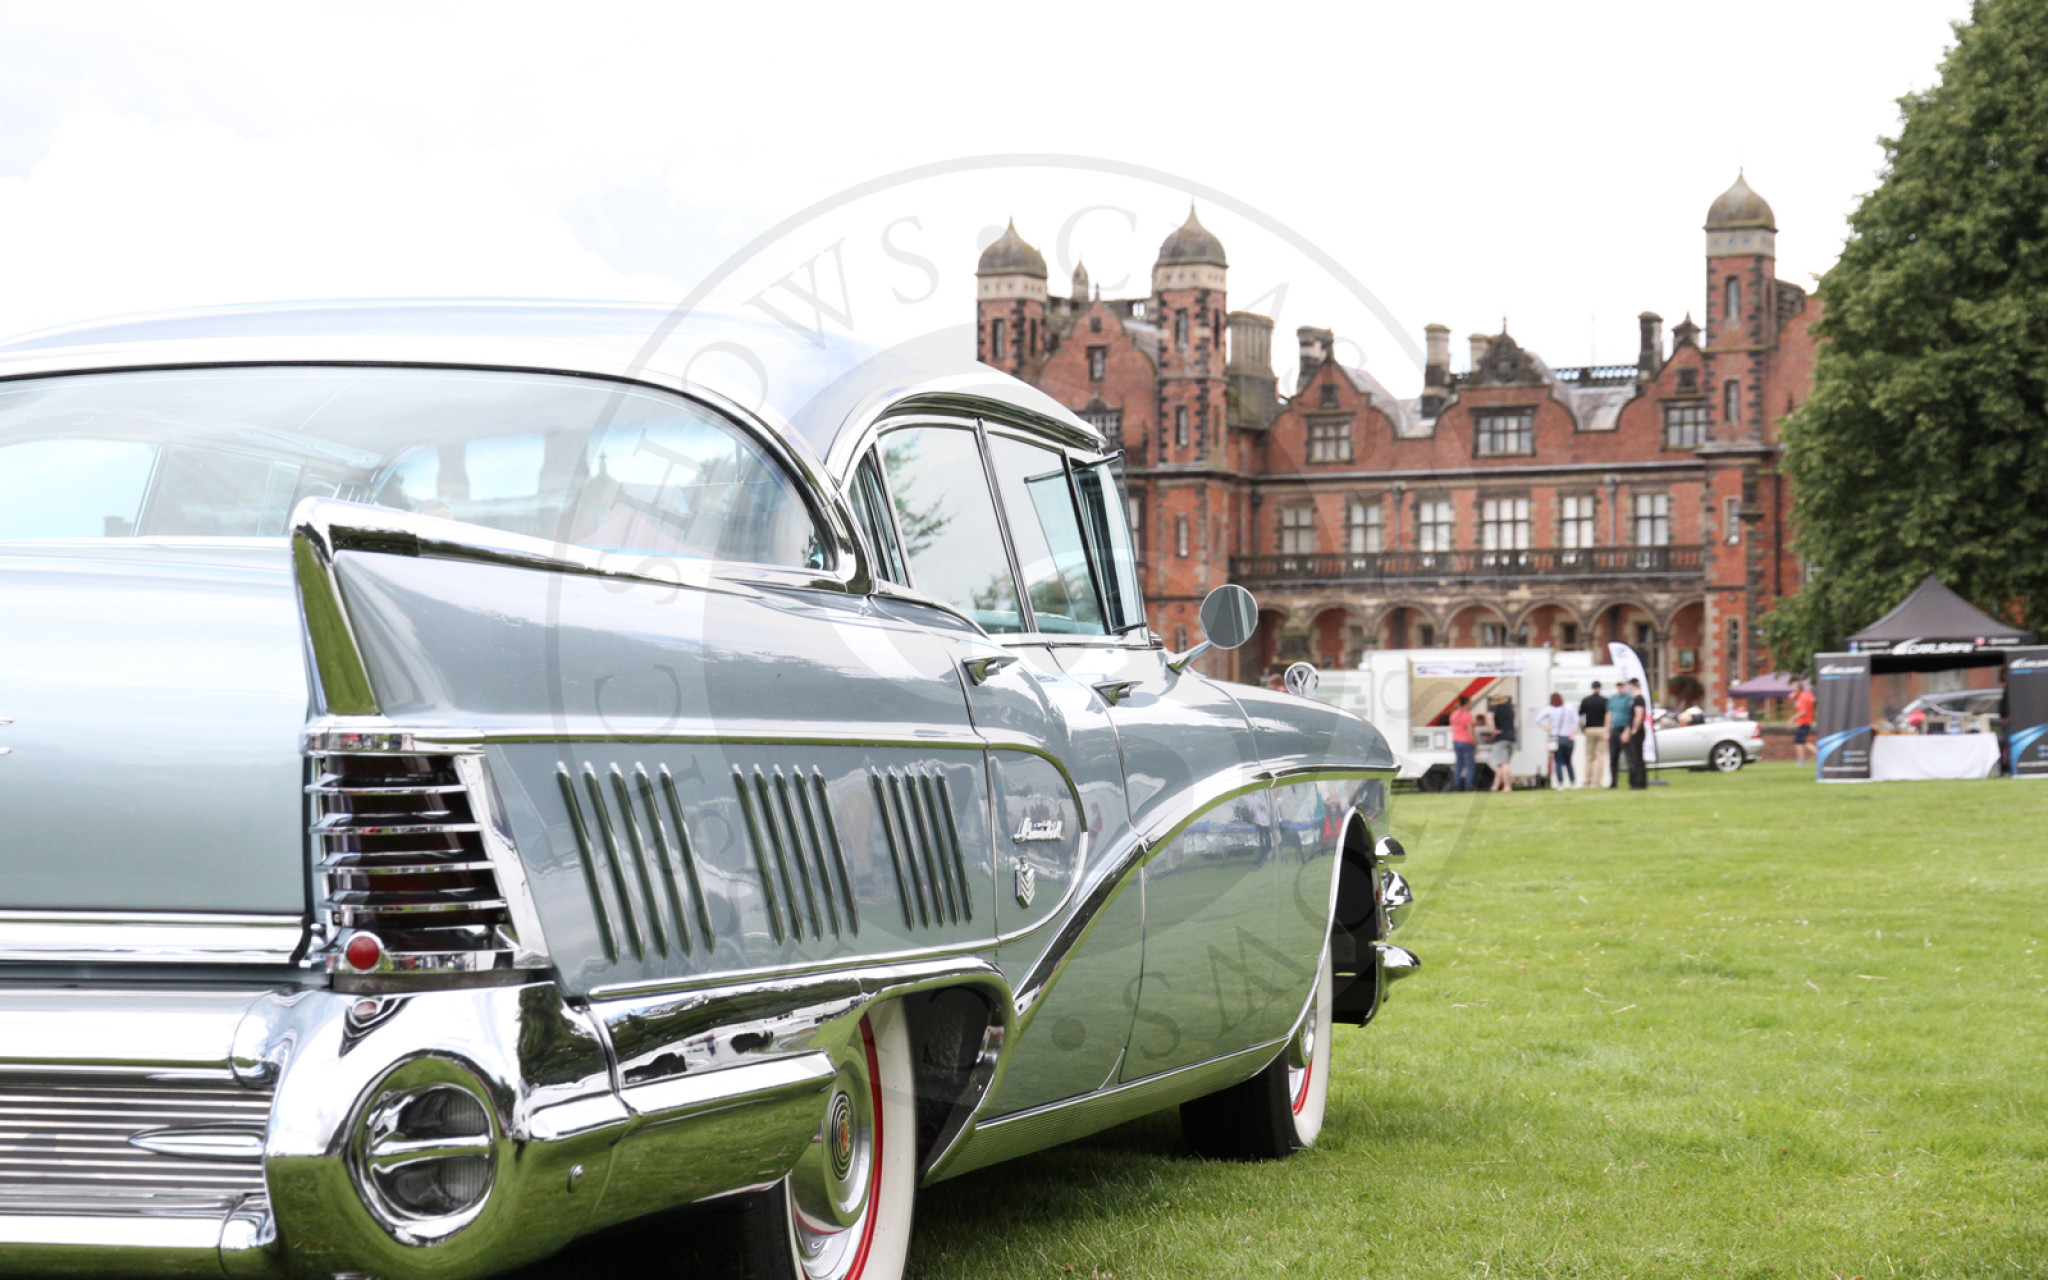 Cheshire-Classic-Car-Bike-Show-Capesthorne-Hall-23-July-2017-Gallery-010.jpg